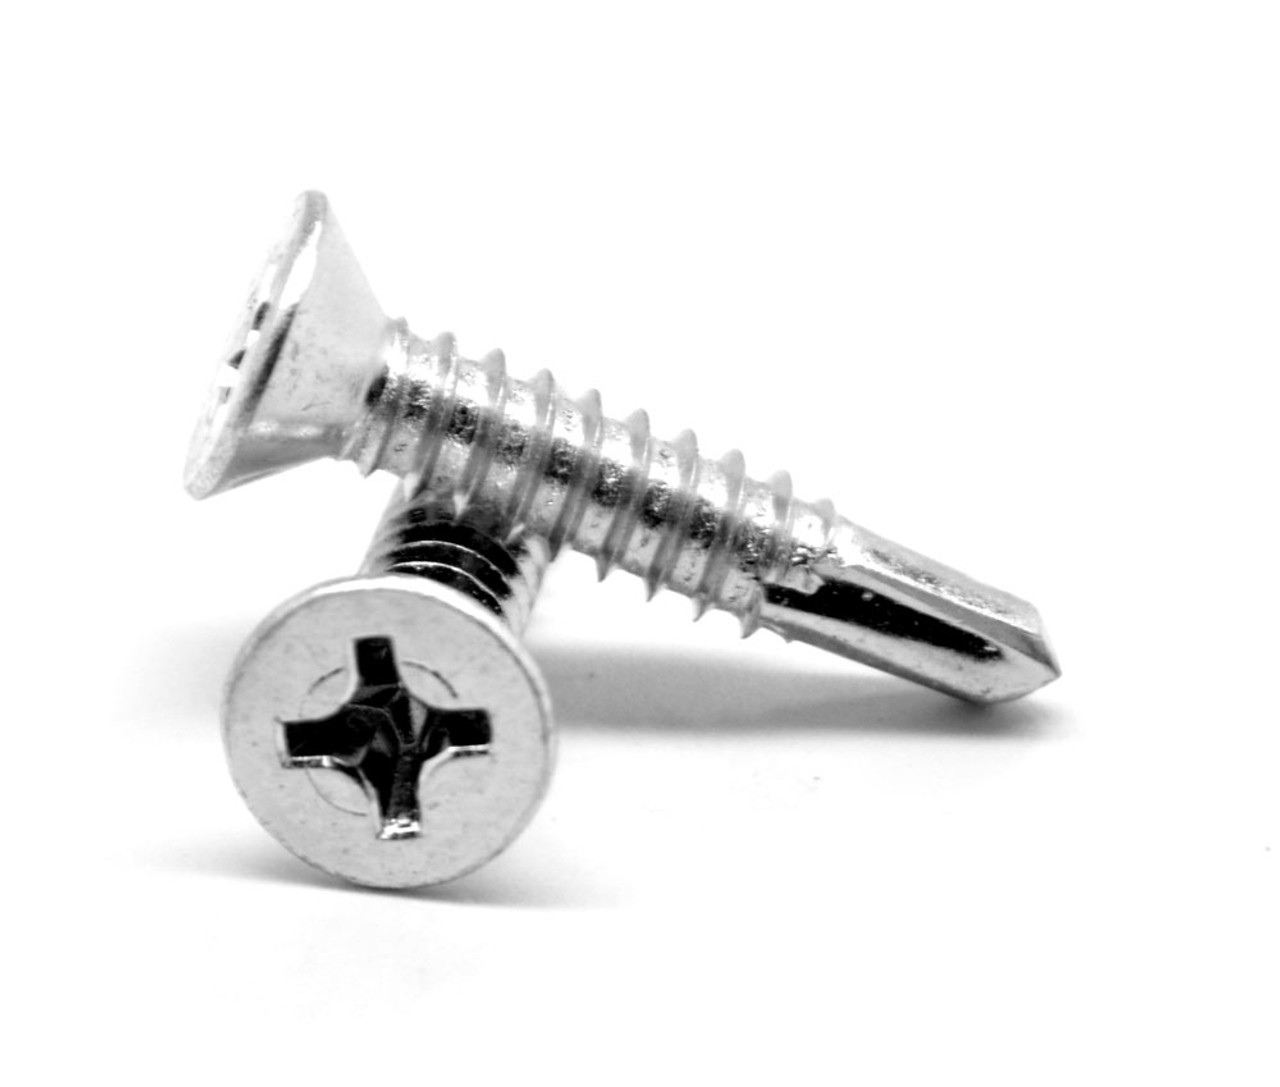 #10-16 x 1" (FT) Self Drilling Screw Phillips Flat Head #3 Point Stainless Steel 18-8